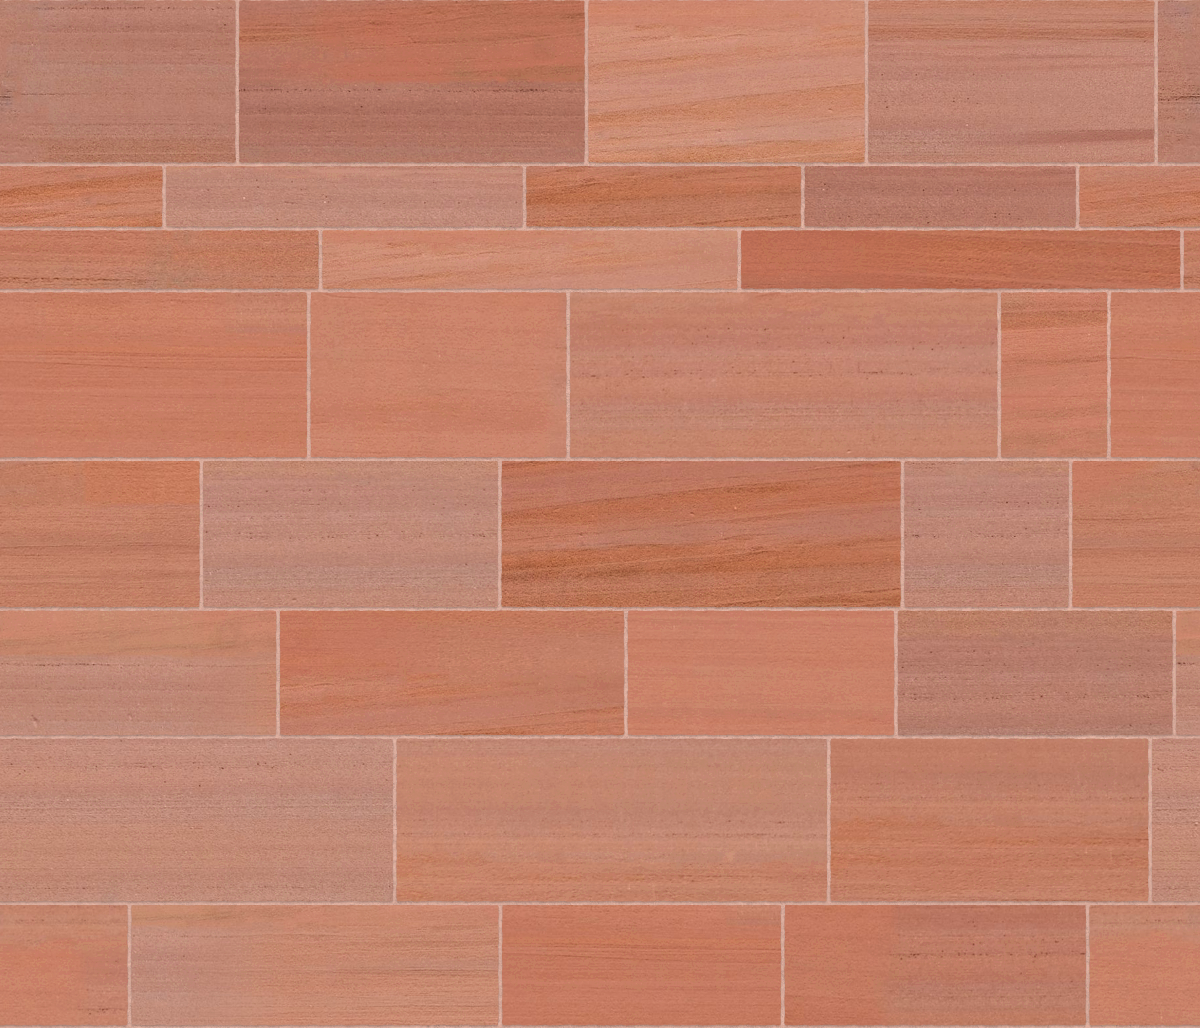 What Makes Red Sandstone Red?